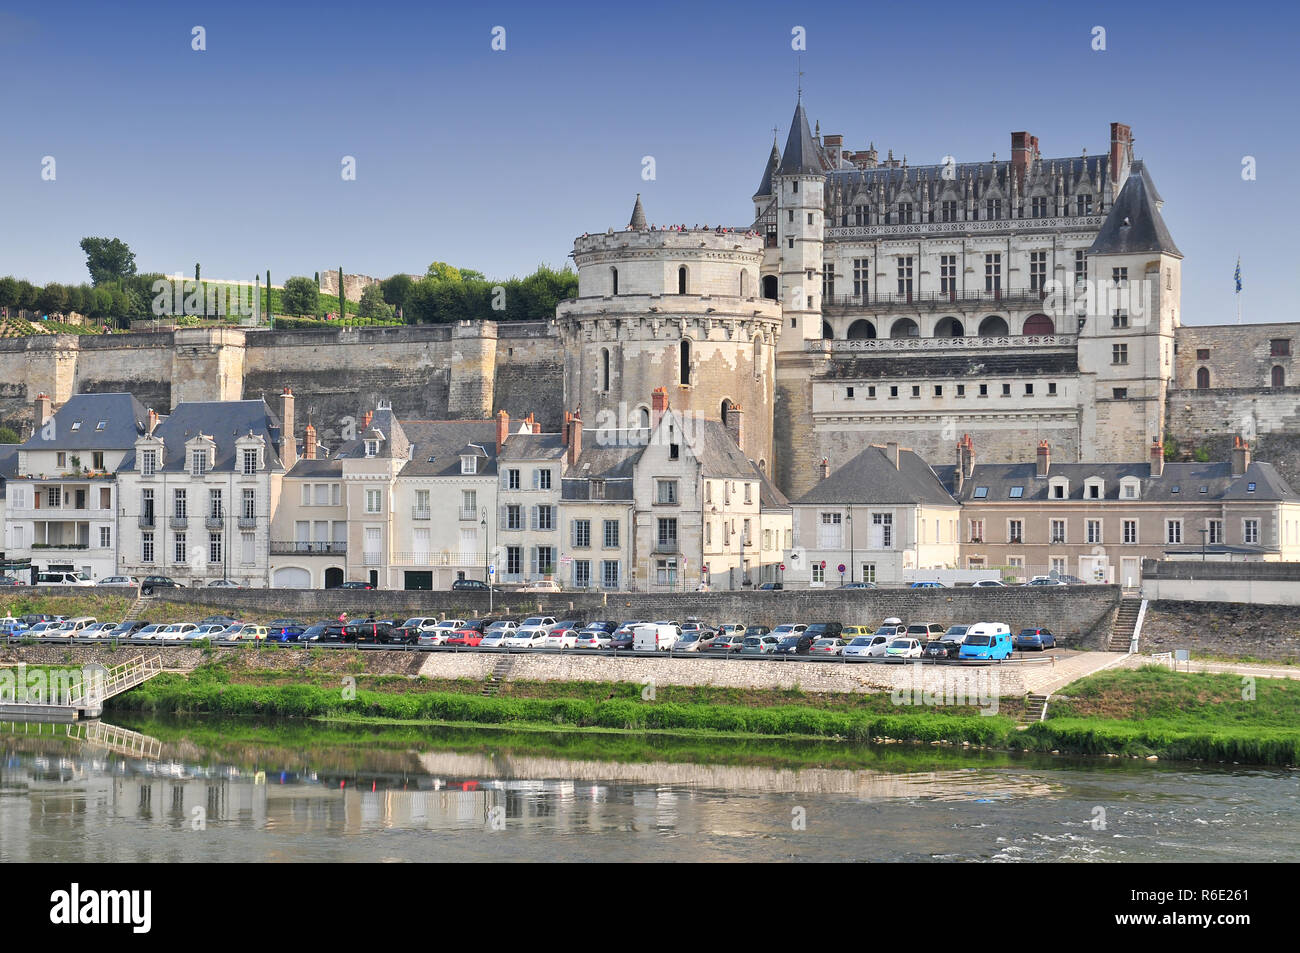 Chateau D`Amboise France This Royal Castle Is Located In Amboise In The Loire Valley Was Built In The 15Th Century And Is A Tourist Attraction Stock Photo